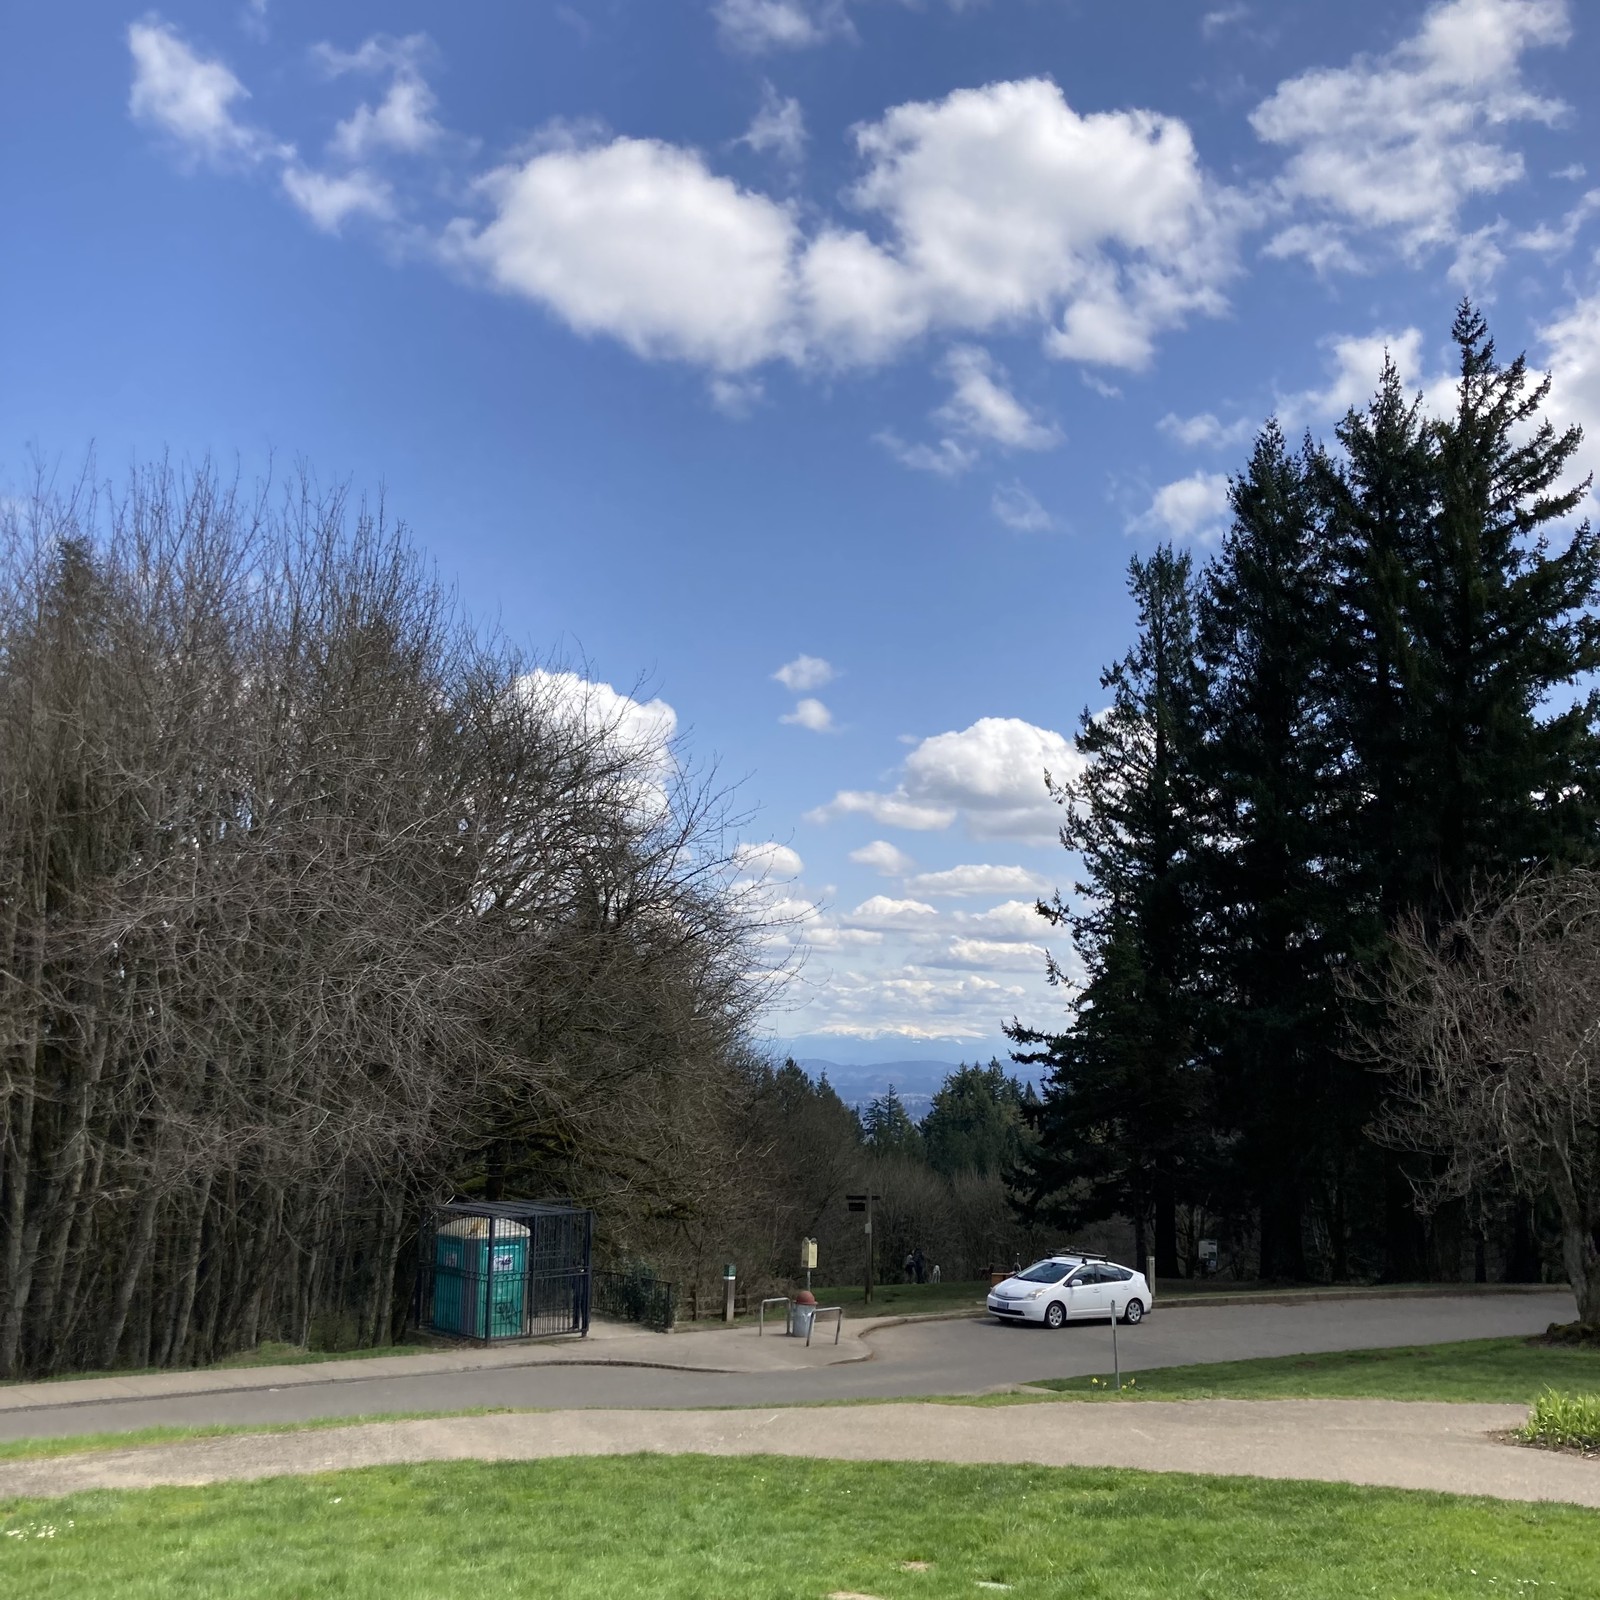 View from Council Crest Park toward Mt. Hood, which is partially visible under a blue sky dotted with small fluffy clouds